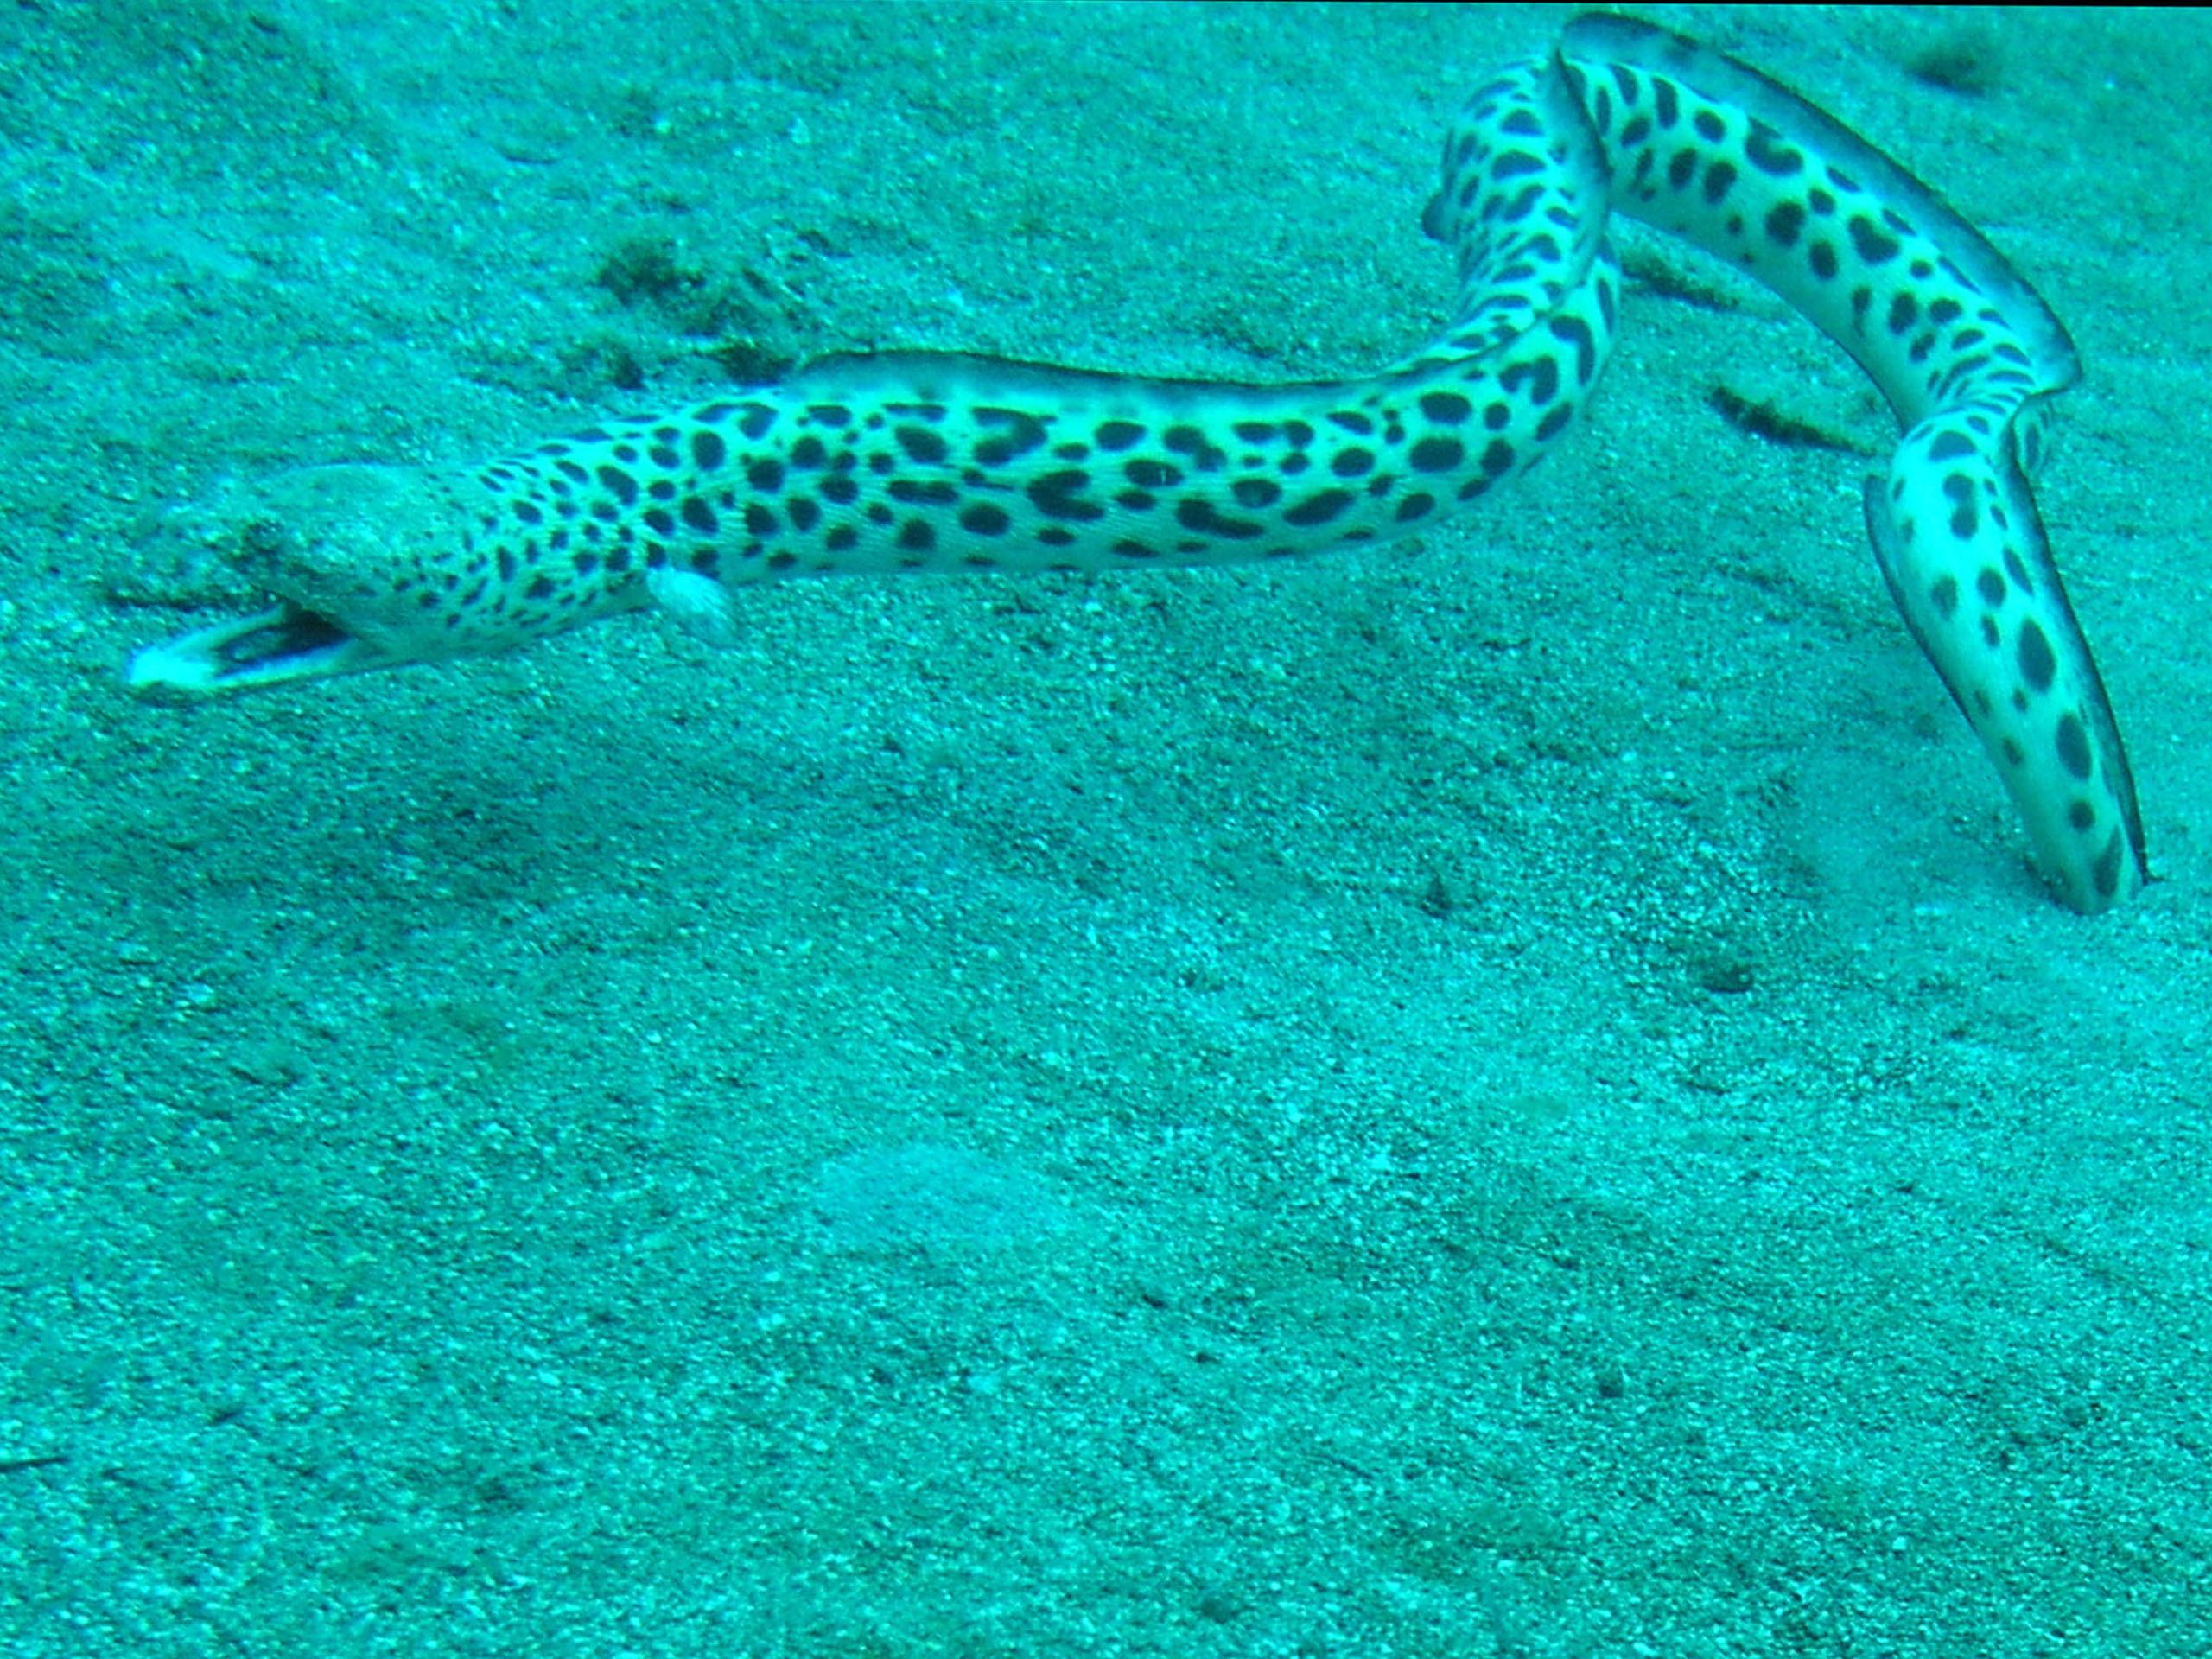 spotted spoon-nose eel